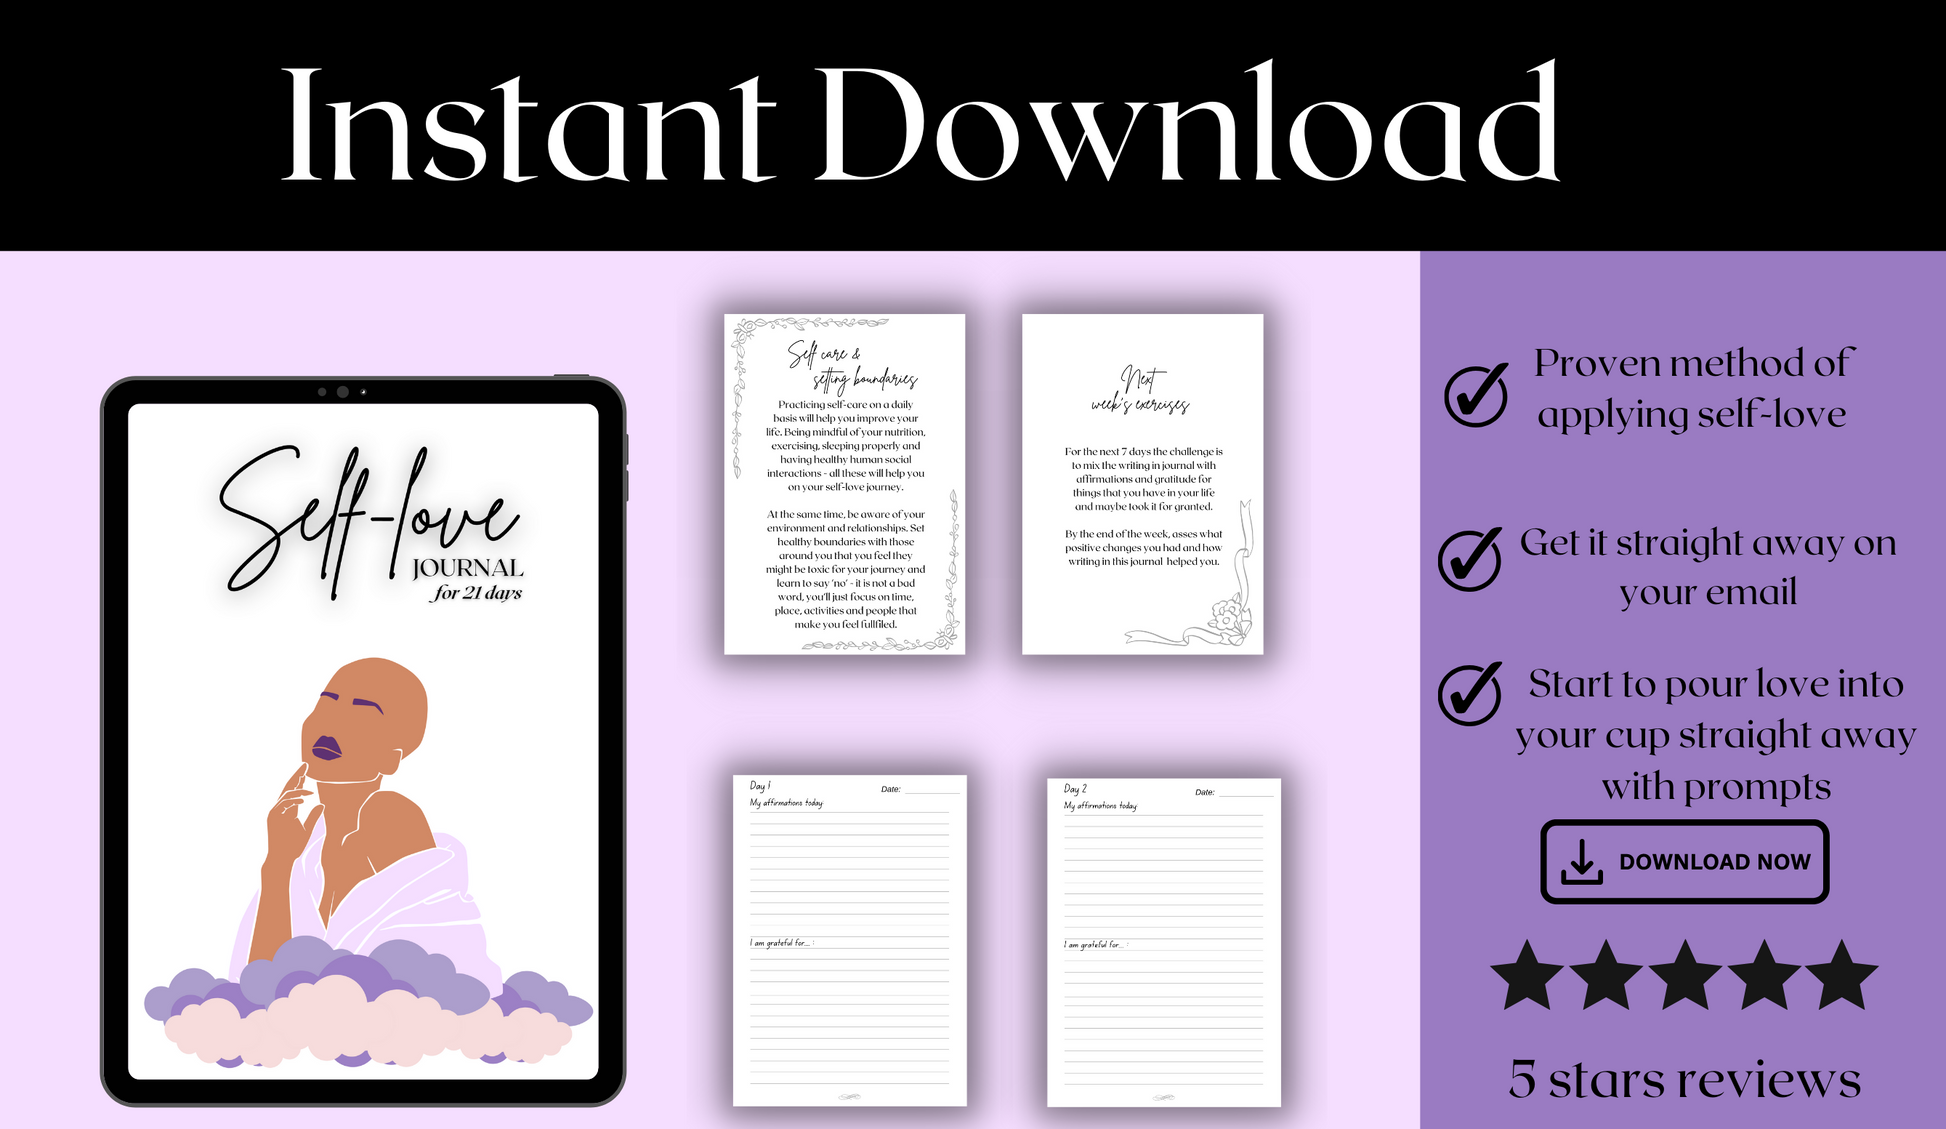 this self love journal is an instant download once you bought it. goes straight to your email and you can print it and use it asap